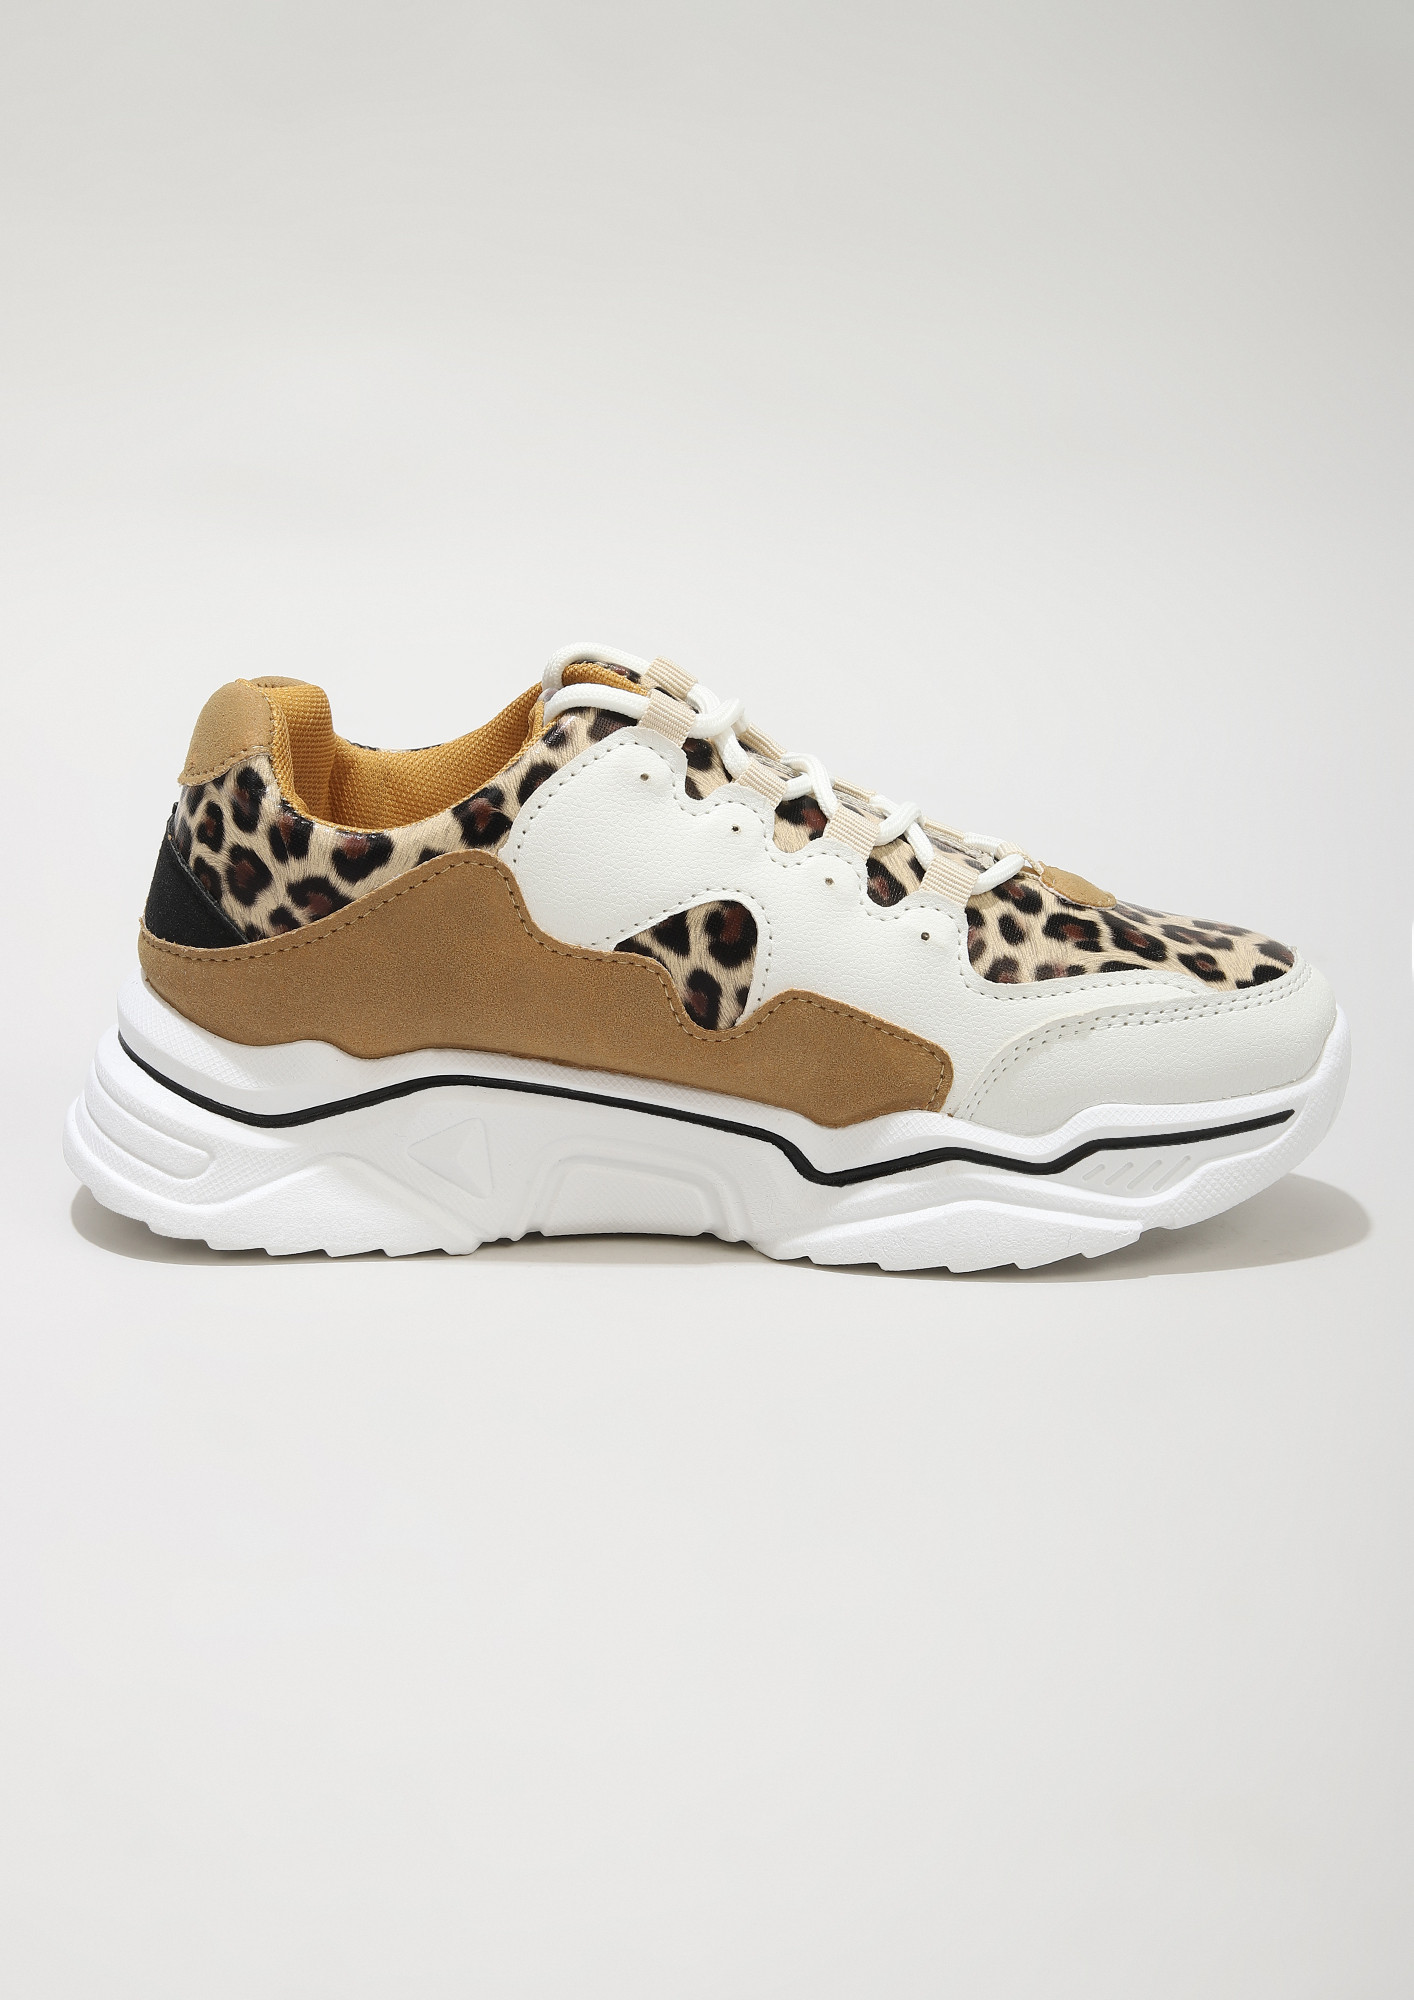 THE HUNTRESS BEIGE TRAINERS